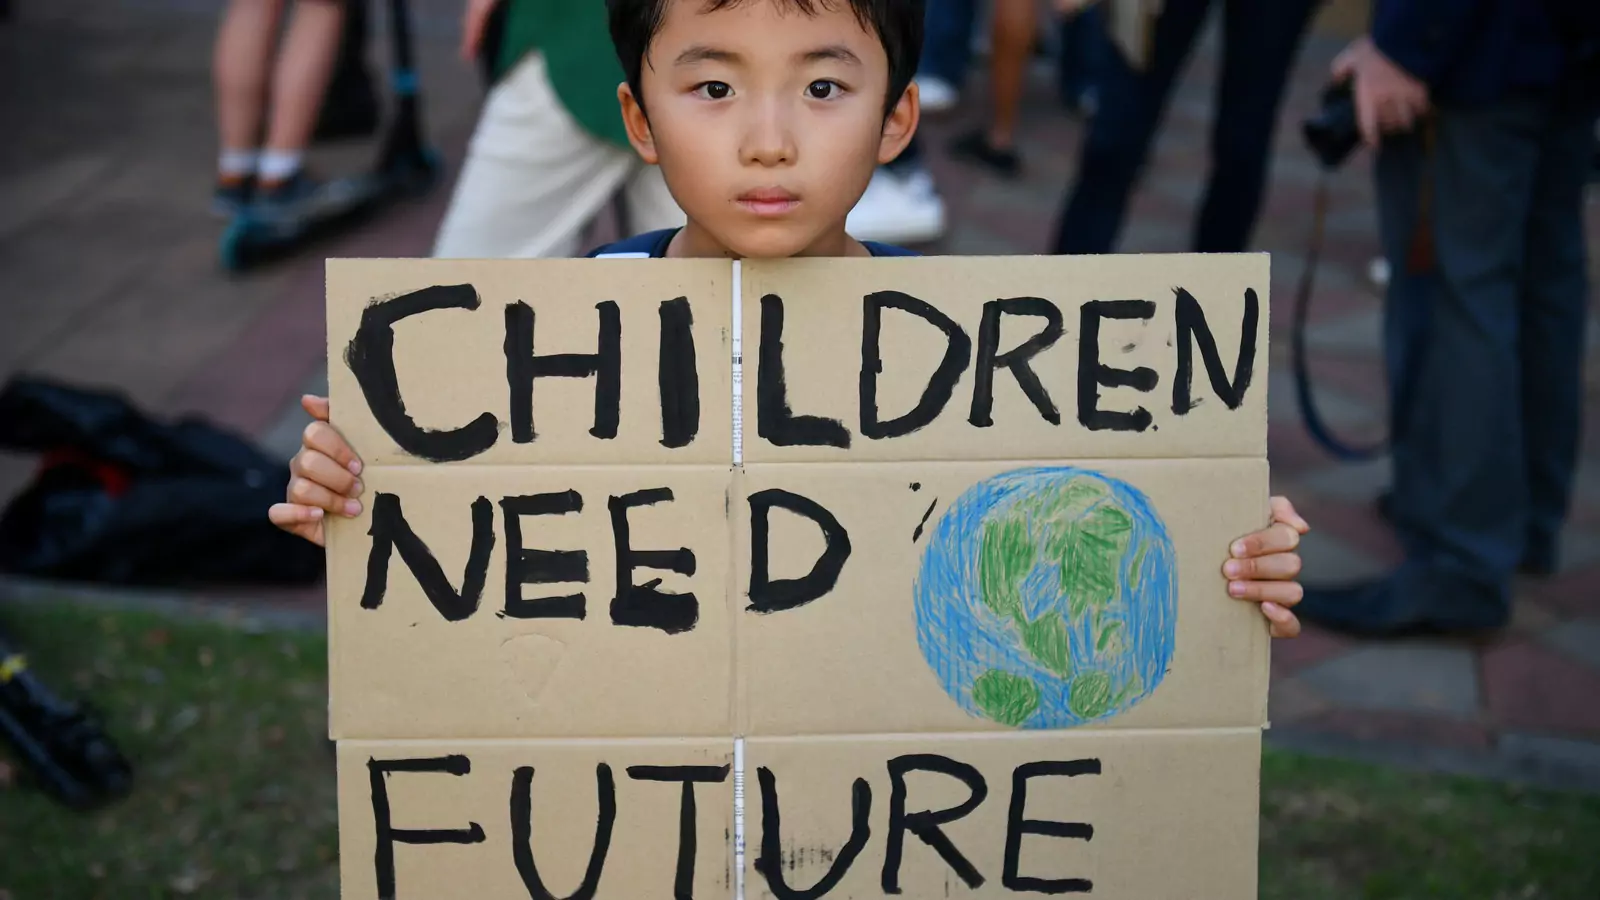 A child holds a placard during a protest against climate change consequences in Bangkok, Thailand on November 29, 2019. 